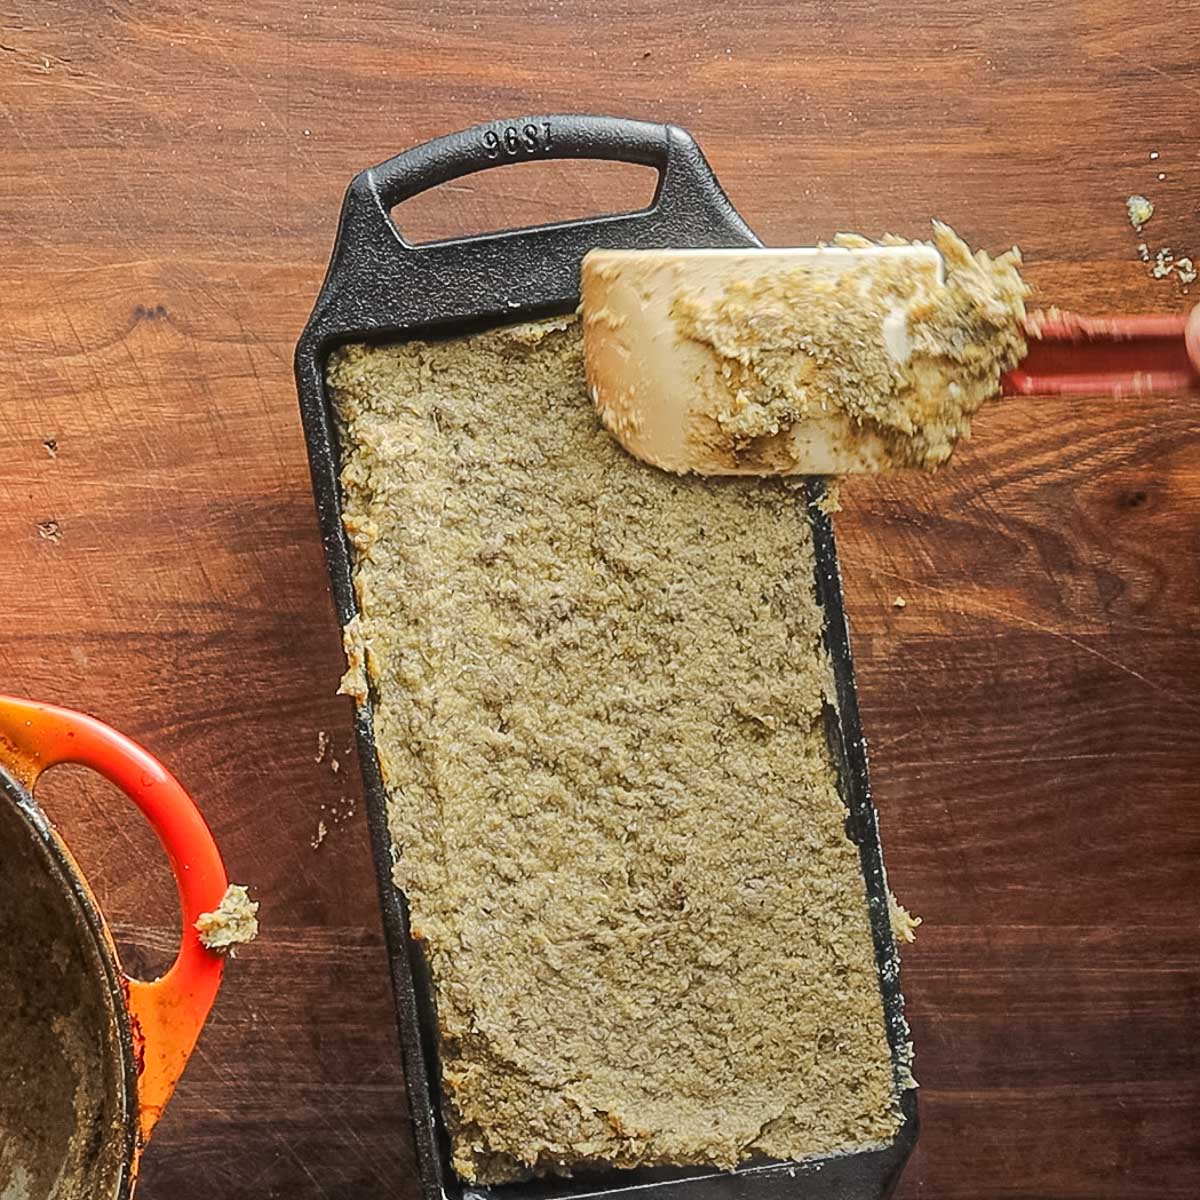 Putting cooked lamb scrapple into a loaf pan with a spatula.